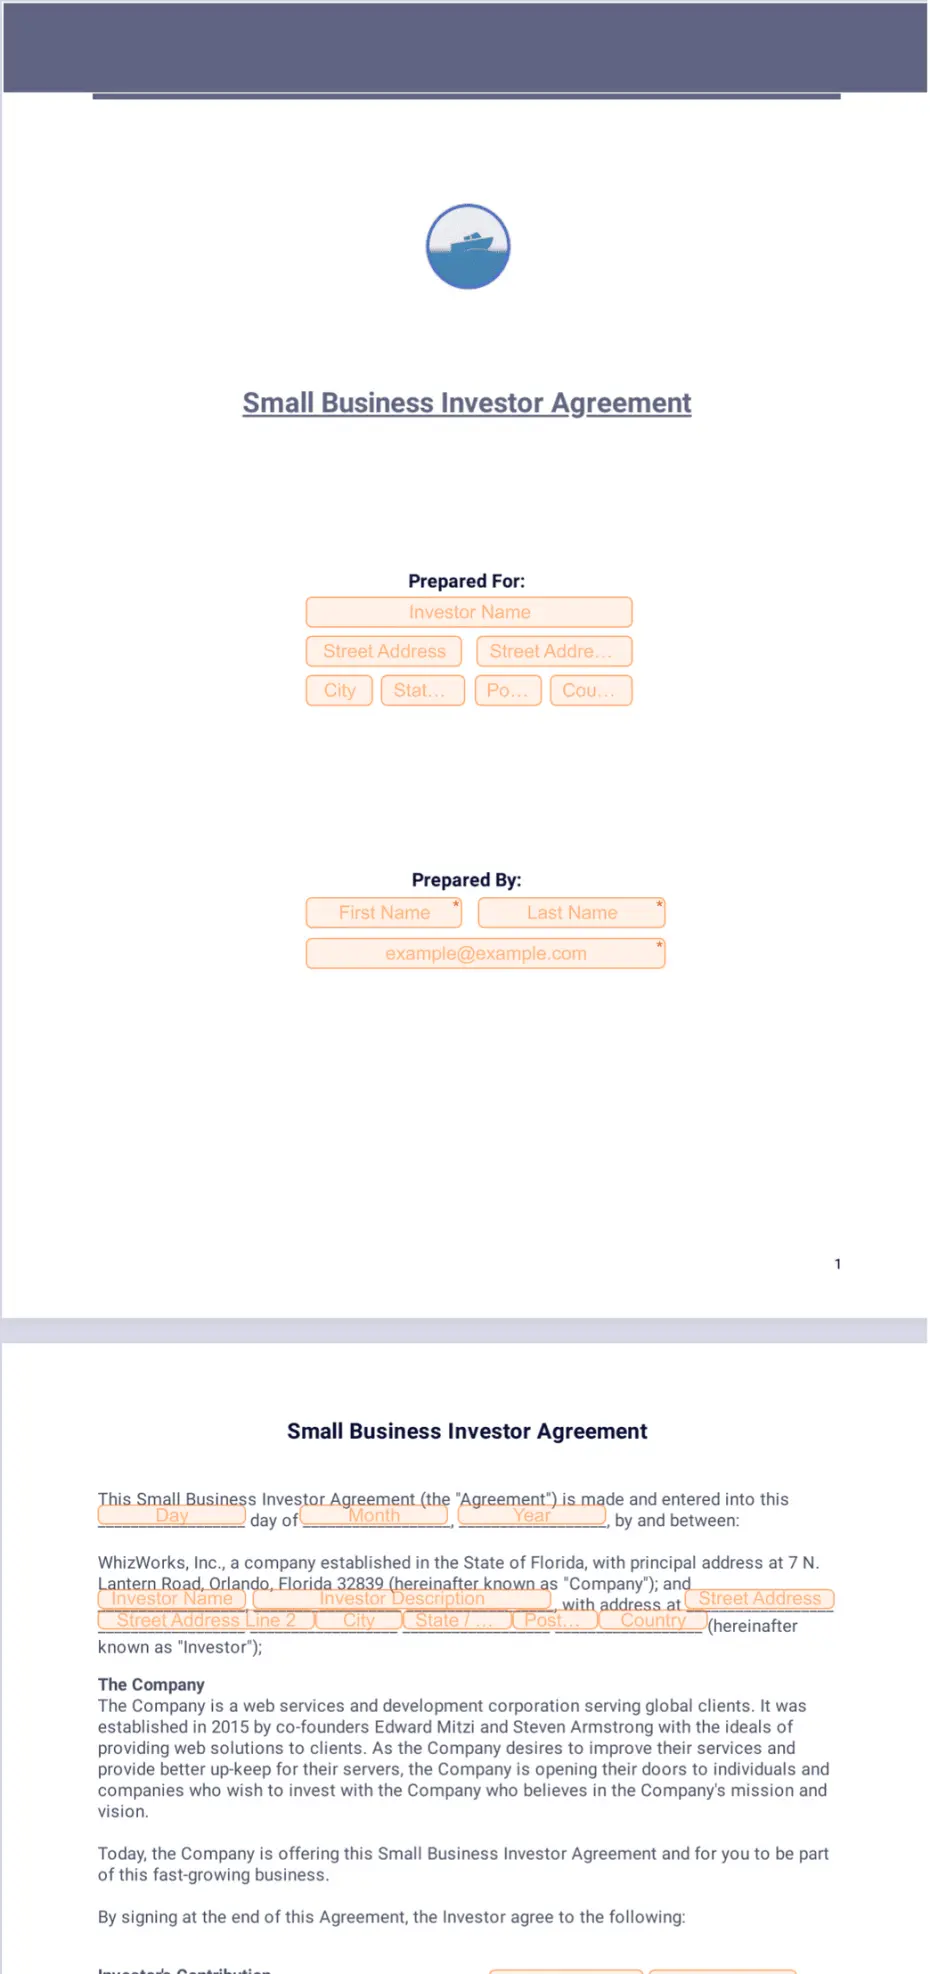 Small Business Investor Agreement